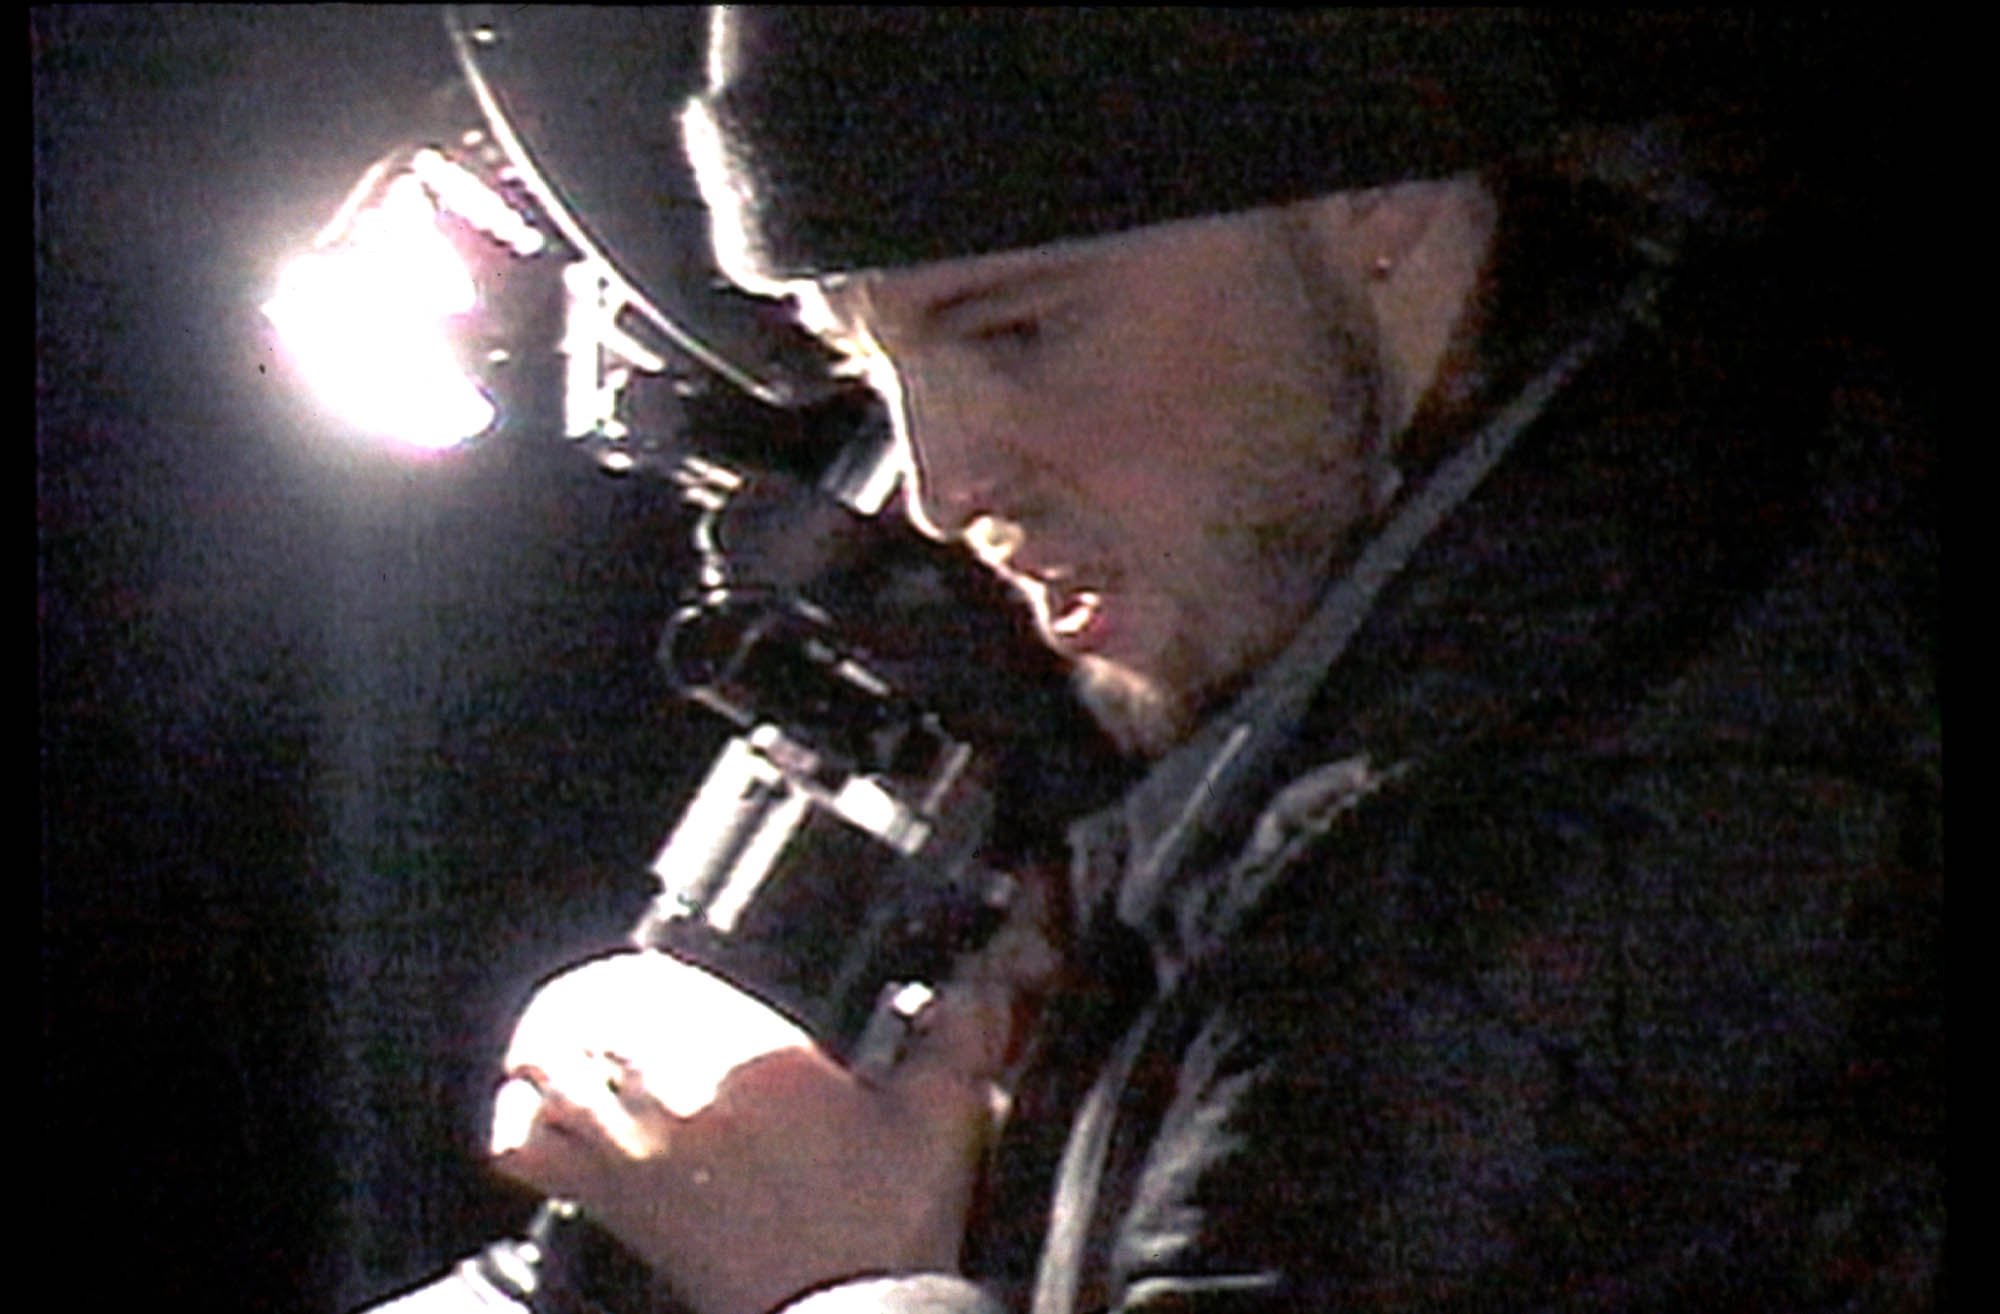 ‘The Blair Witch Project’ Actors Were Just As Surprised As the Audience — Filmmakers Kept Scary Details Secret While Filming